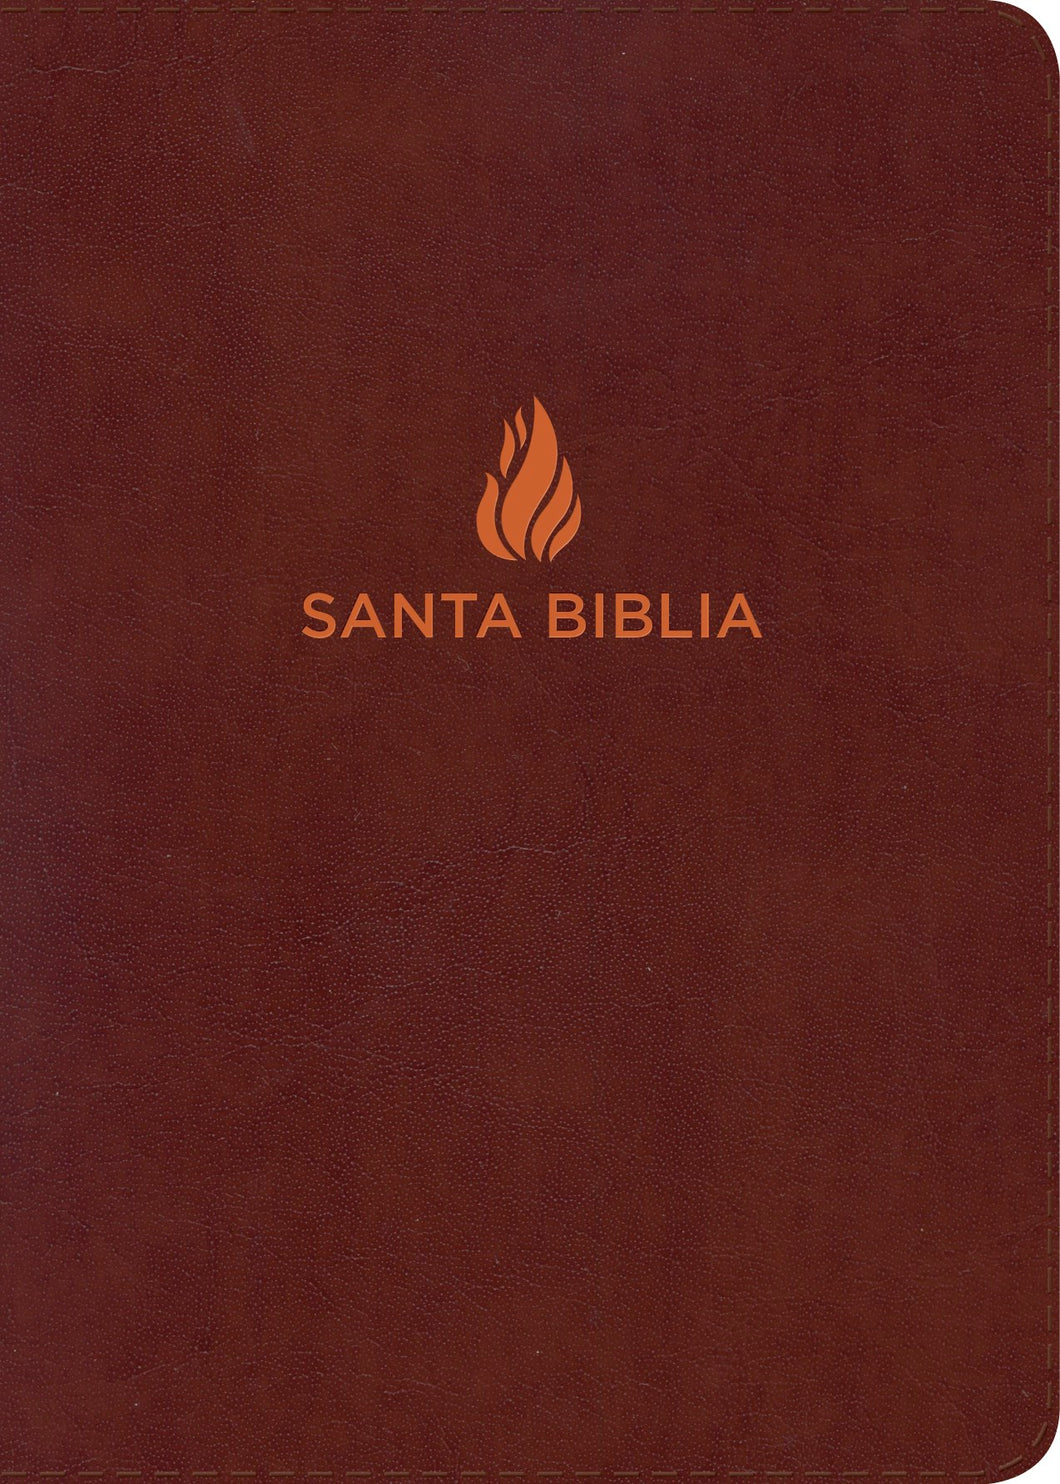 Spanish-RVR 1960 Giant Print Reference Bible (Biblia Letra Gigante con Referencias)-Brown Bonded Leather